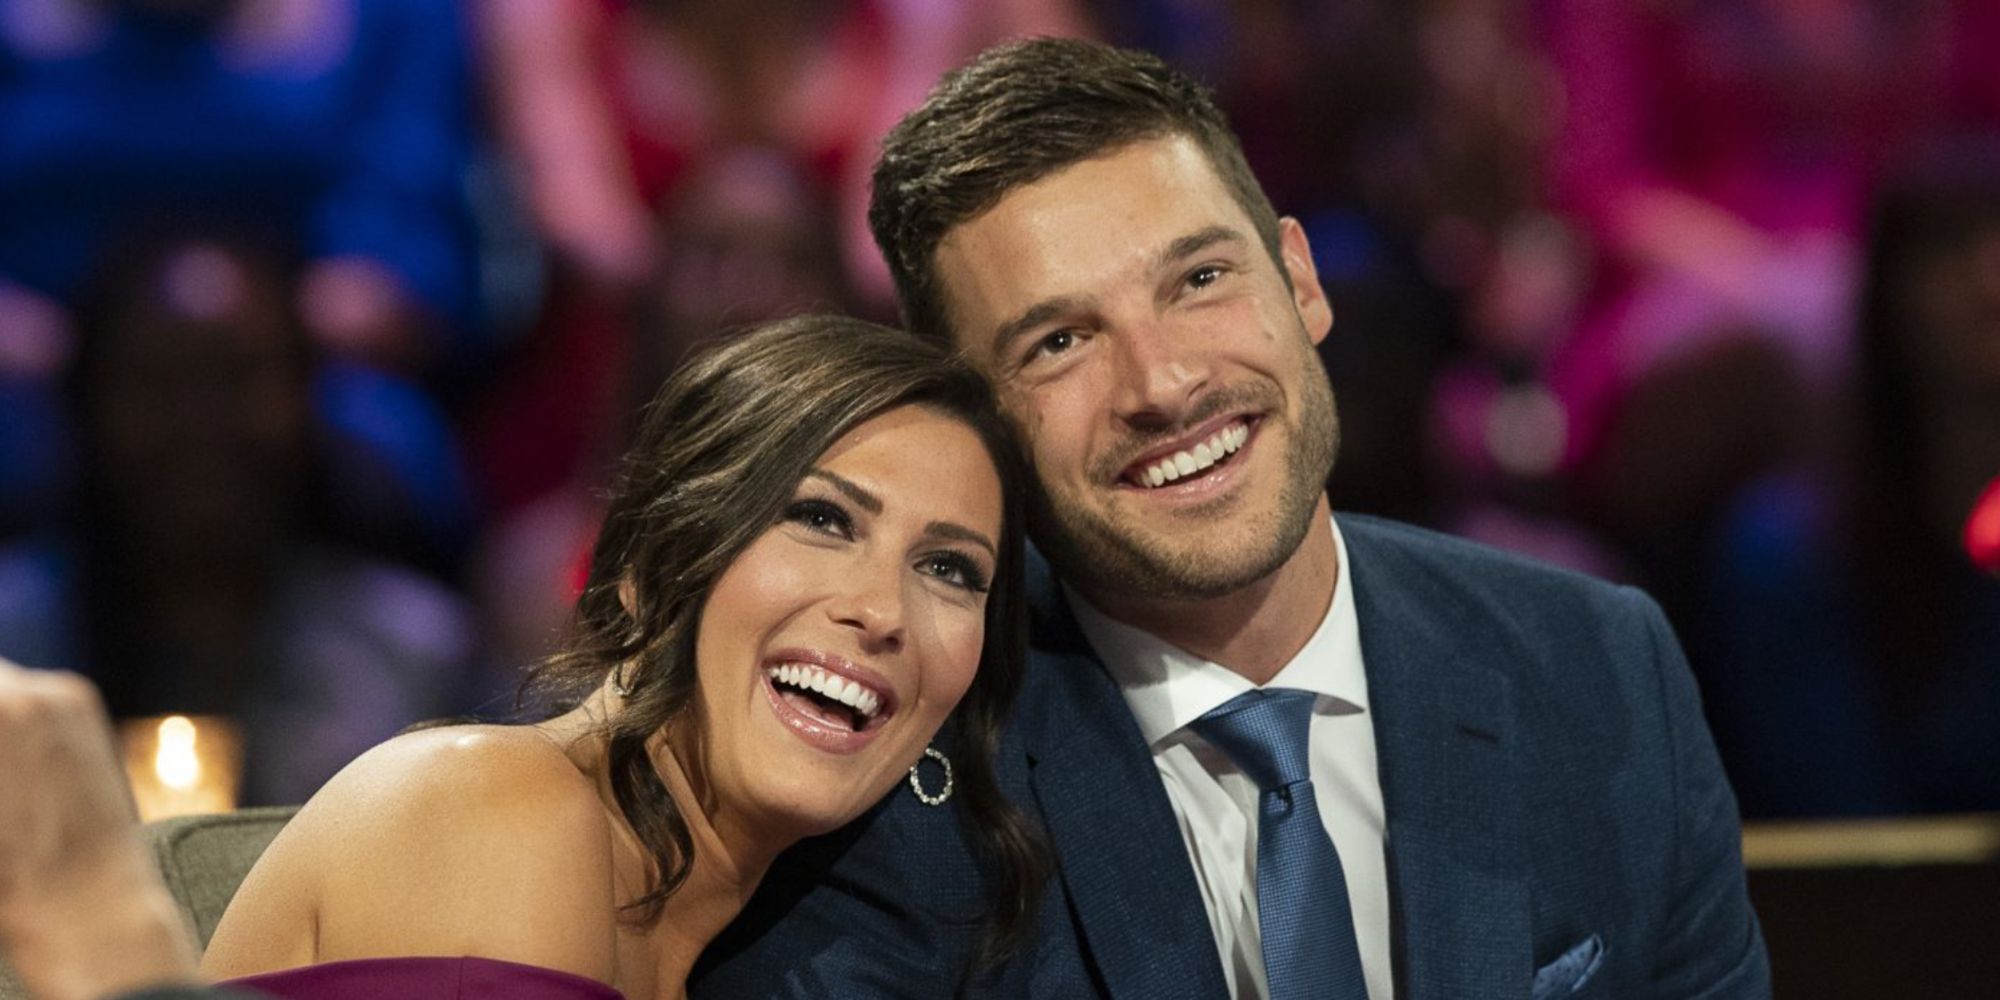 Bachelor: Becca Kufrin Told Matt James To Ask Contestants How They Voted